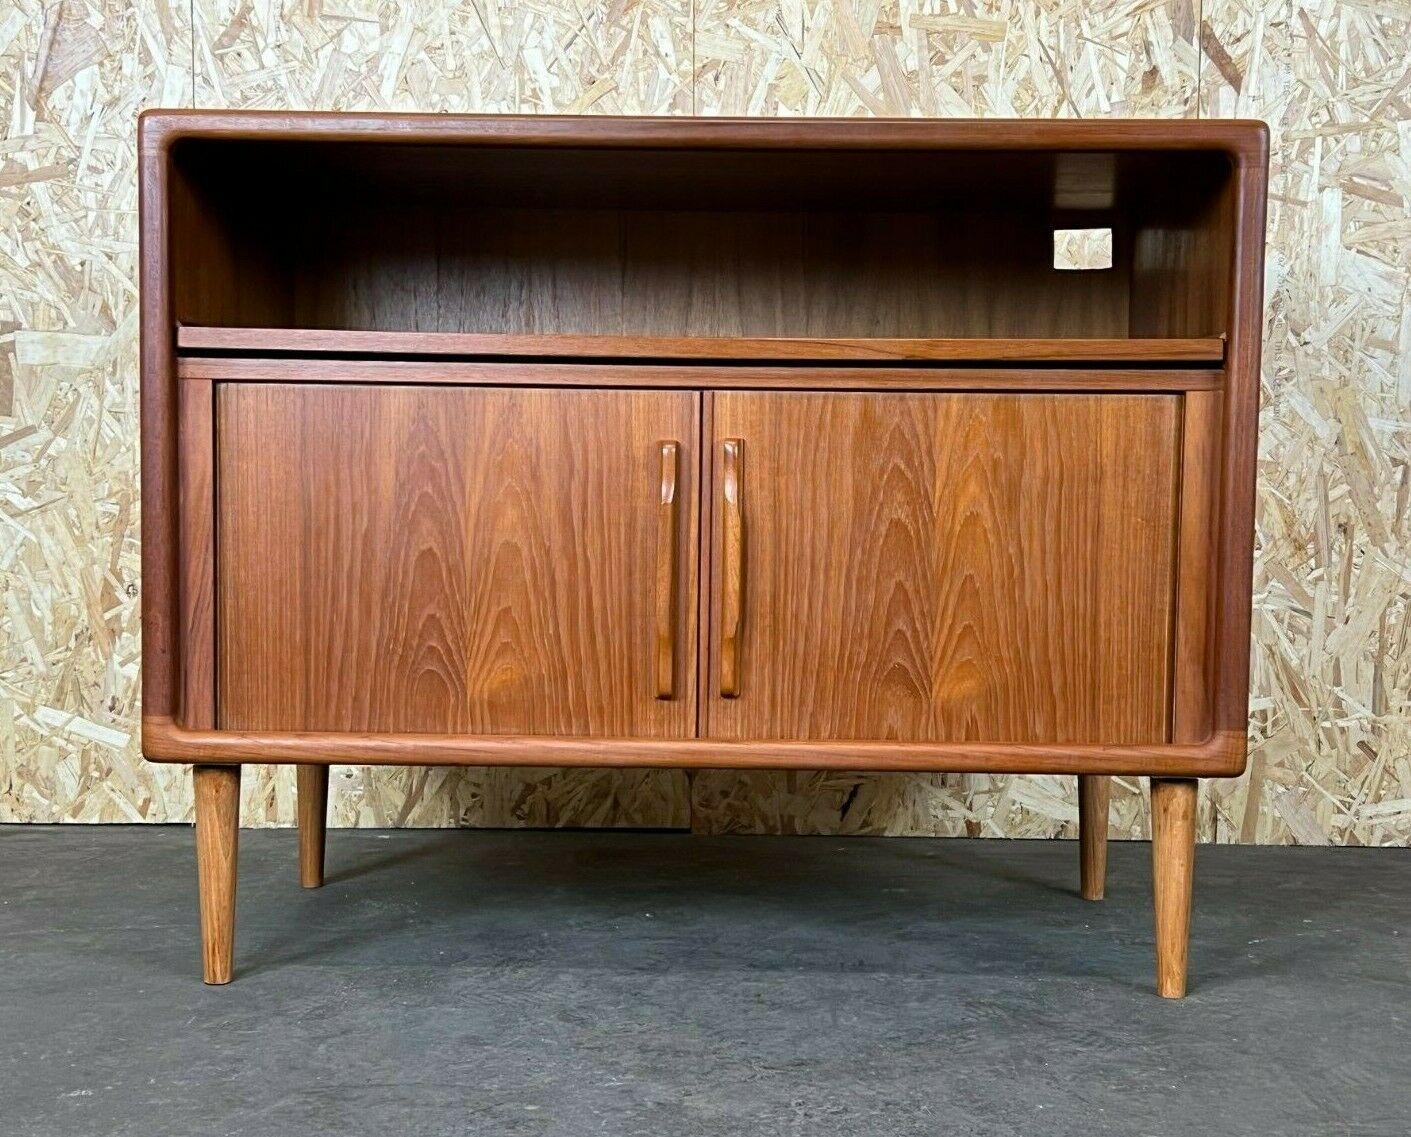 60s 70s teak sideboard Credenza cabinet Danish Modern Design Denmark 70s (05)

Object: sideboard

Manufacturer:

Condition: good

Age: around 1960-1970

Dimensions:

99.5cm x 55.5cm x 79.5cm

Other notes:

The pictures serve as part